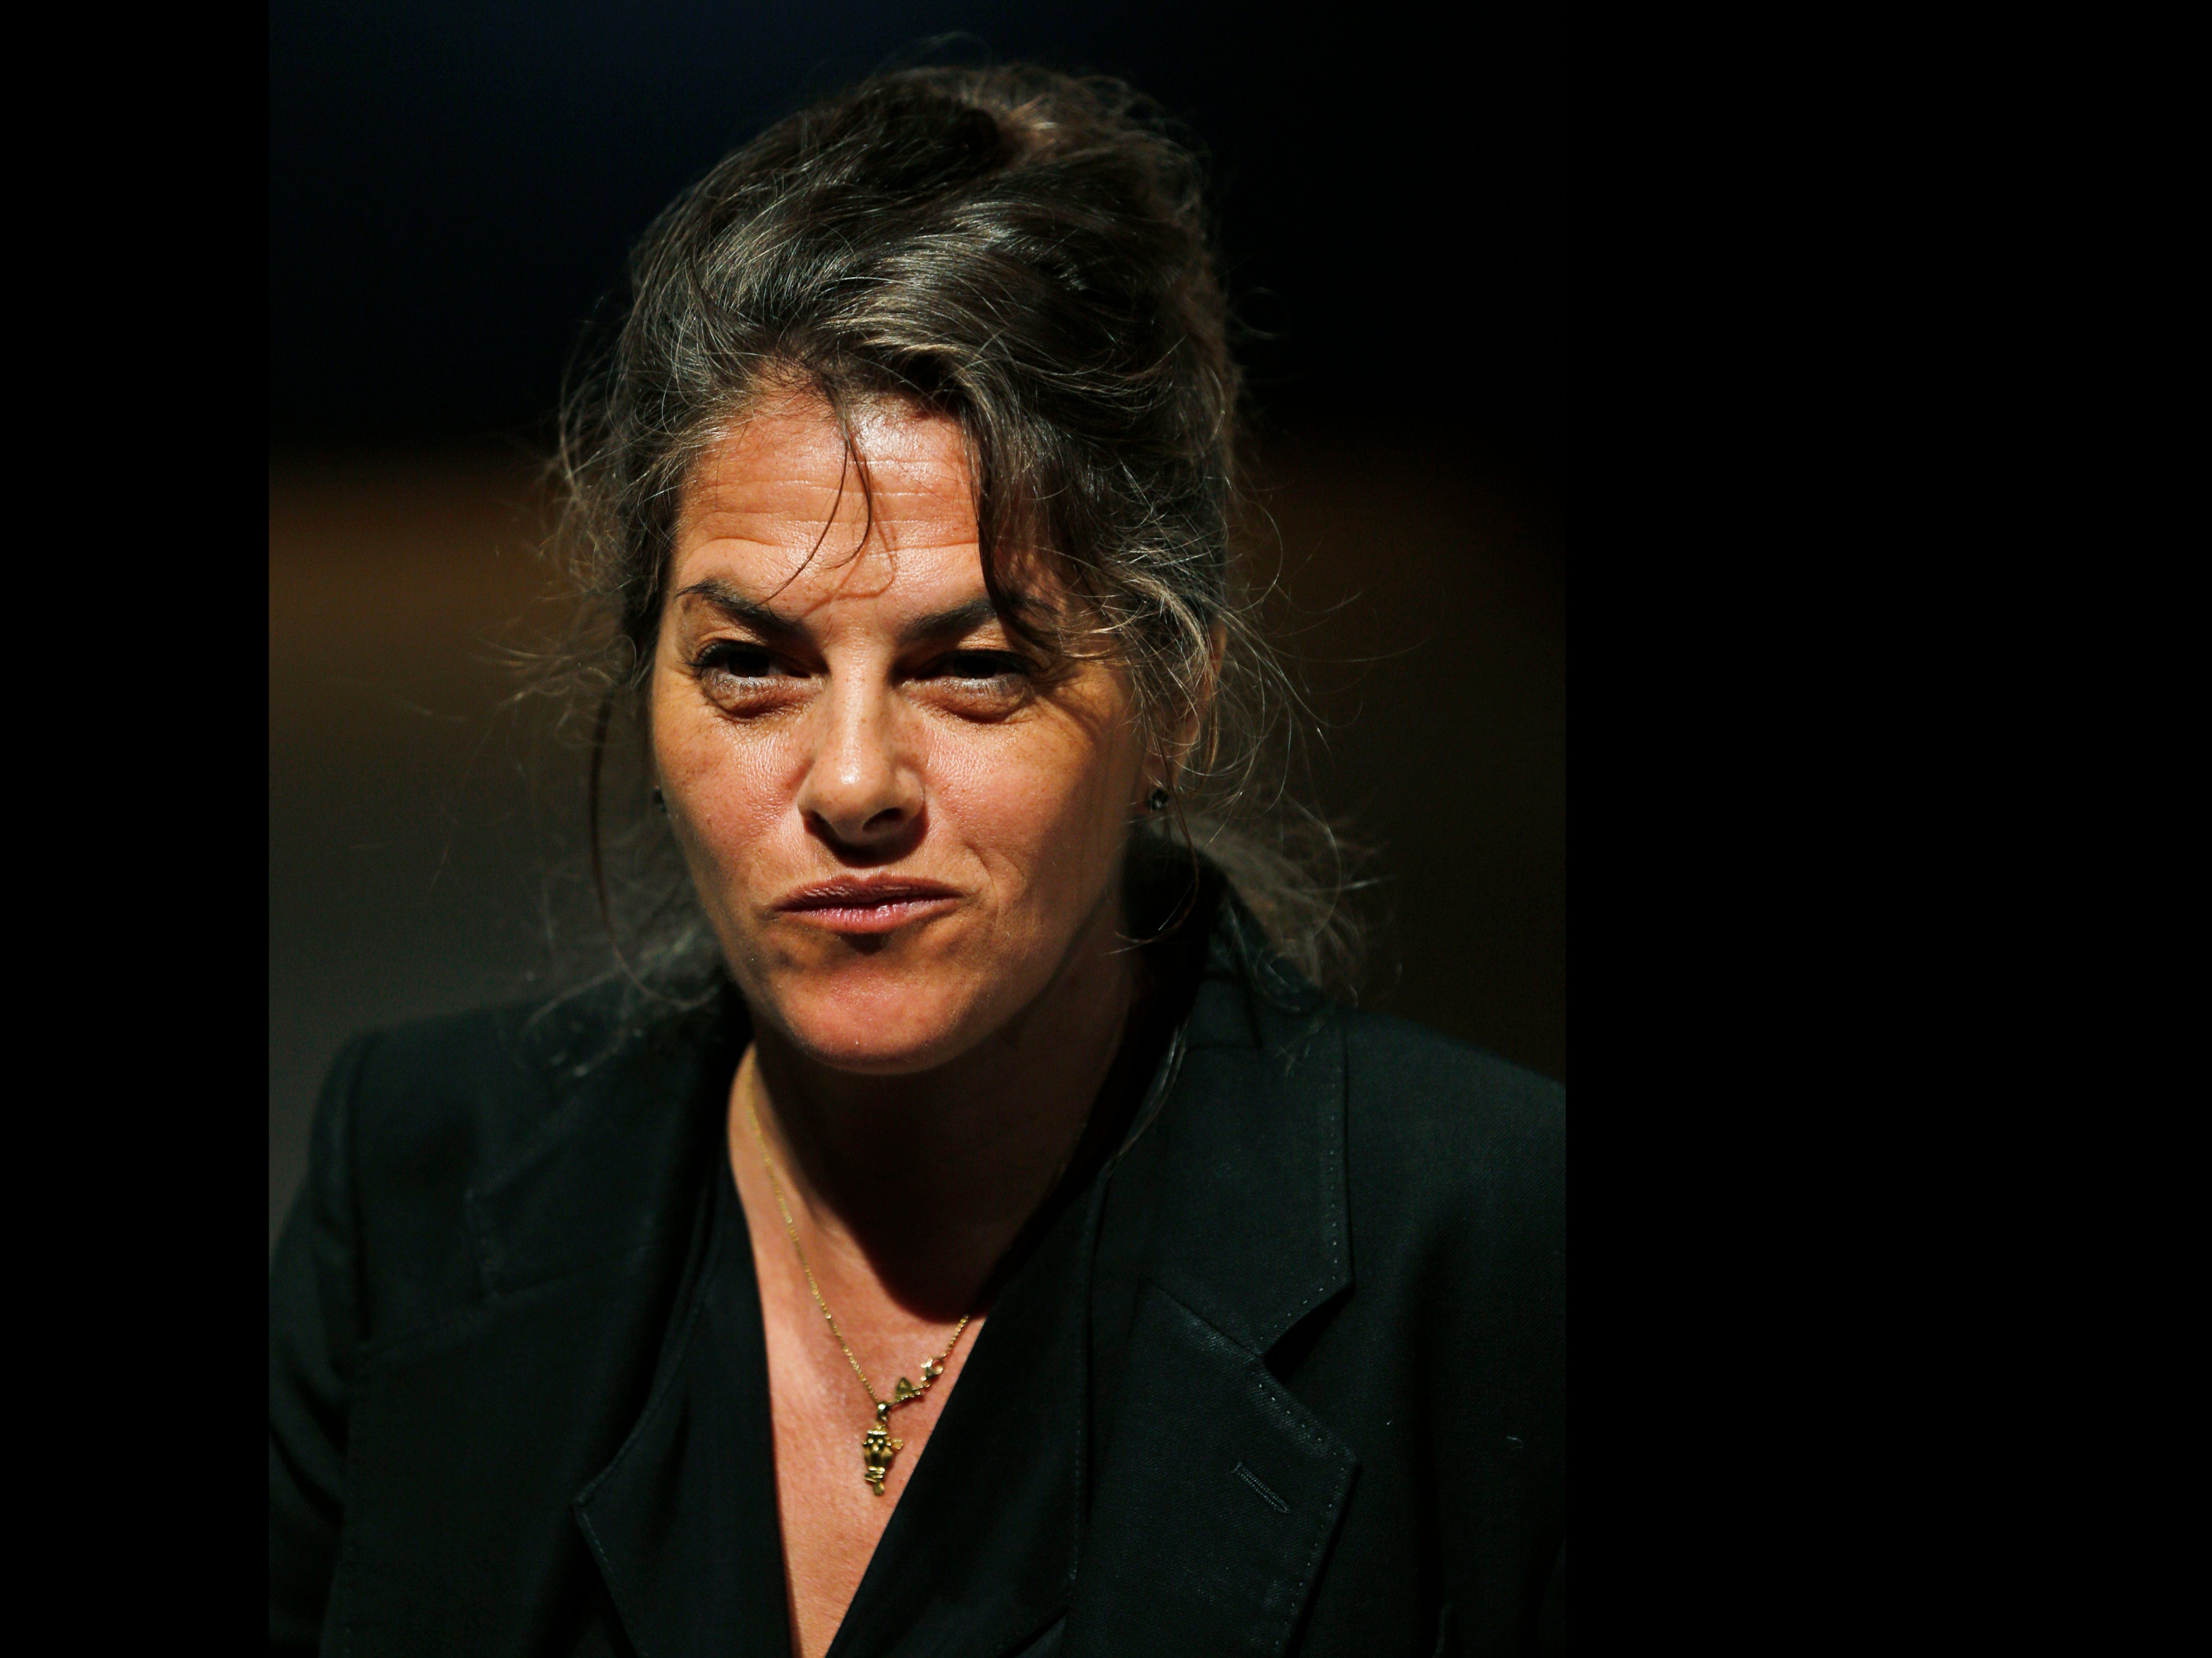 Tracey Emin on 27 June 2014 at an auction house exhibition next to her 1998 piece ‘My Bed'